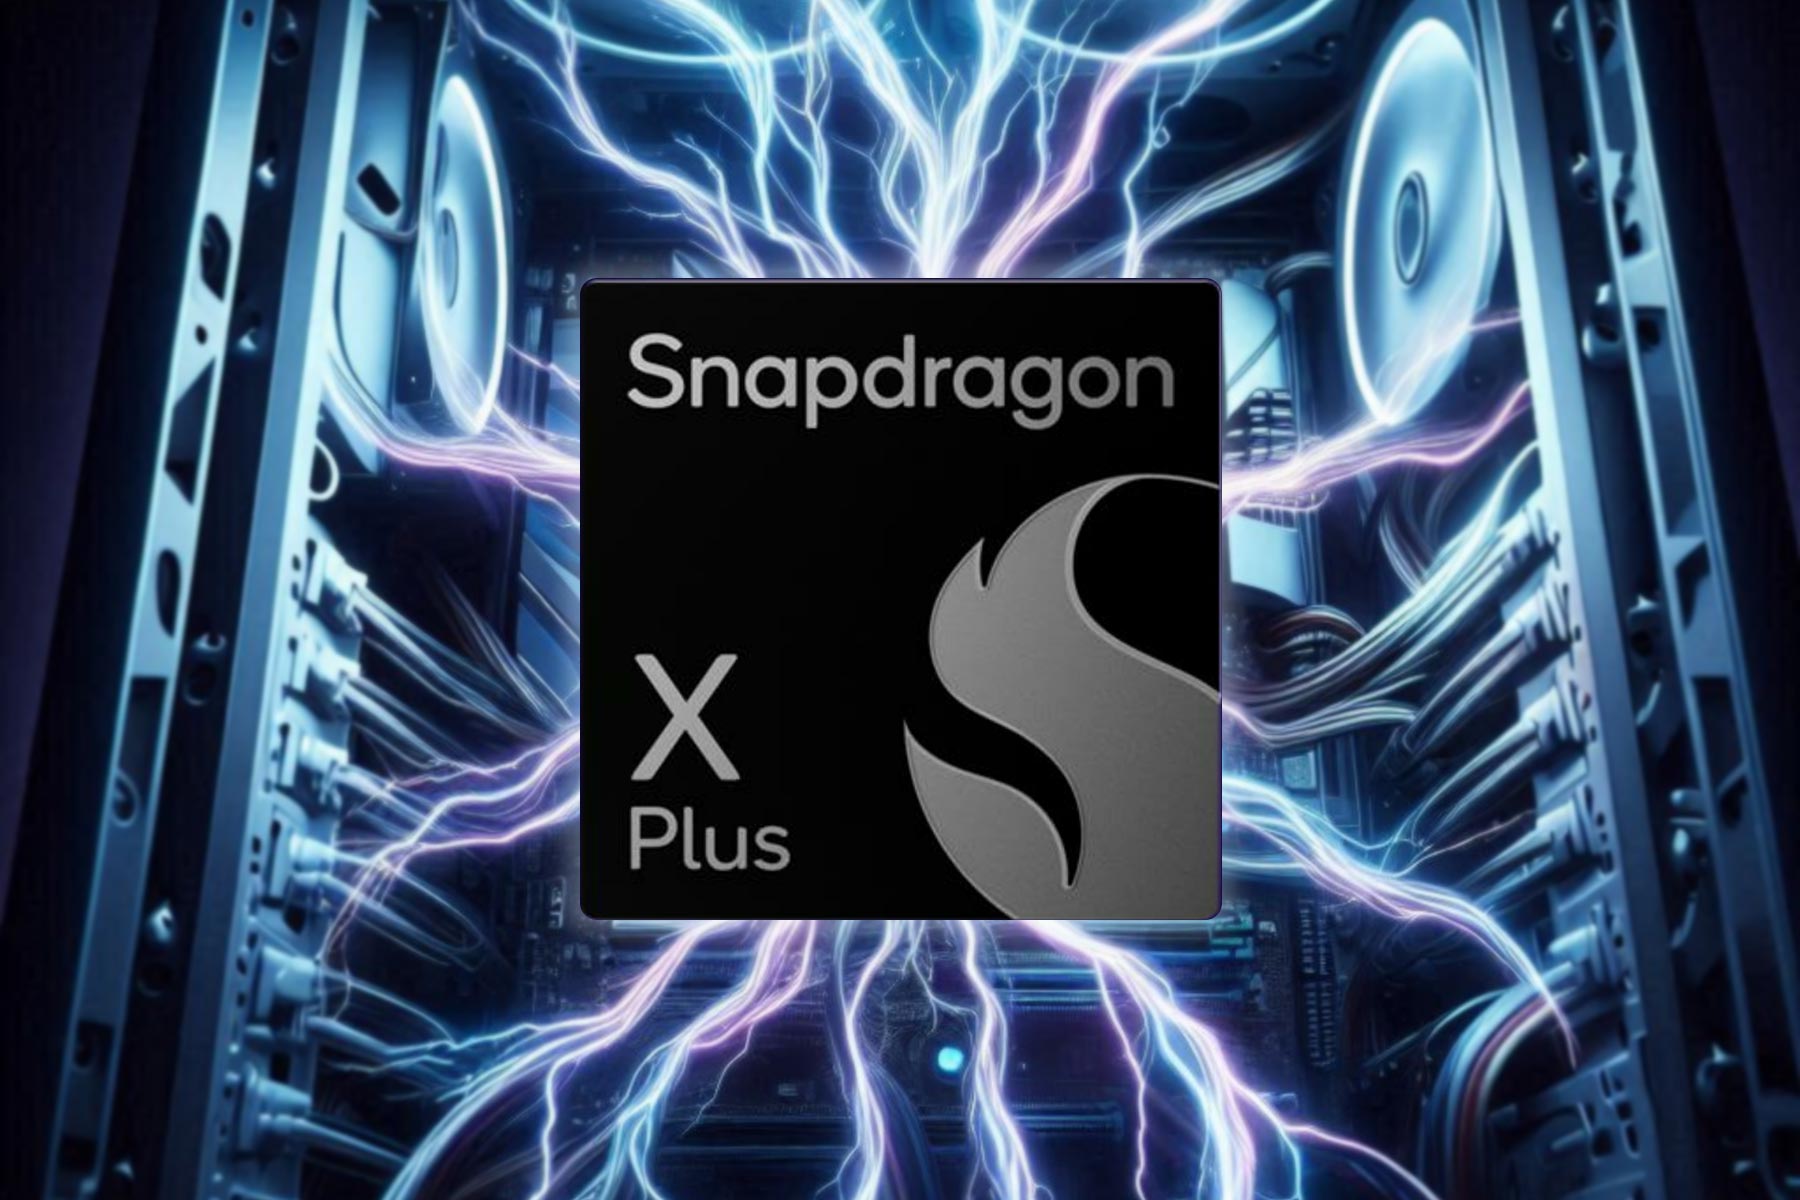 Latest from Qualcomm: Snapdragon X Plus for Windows ARM PCs announced